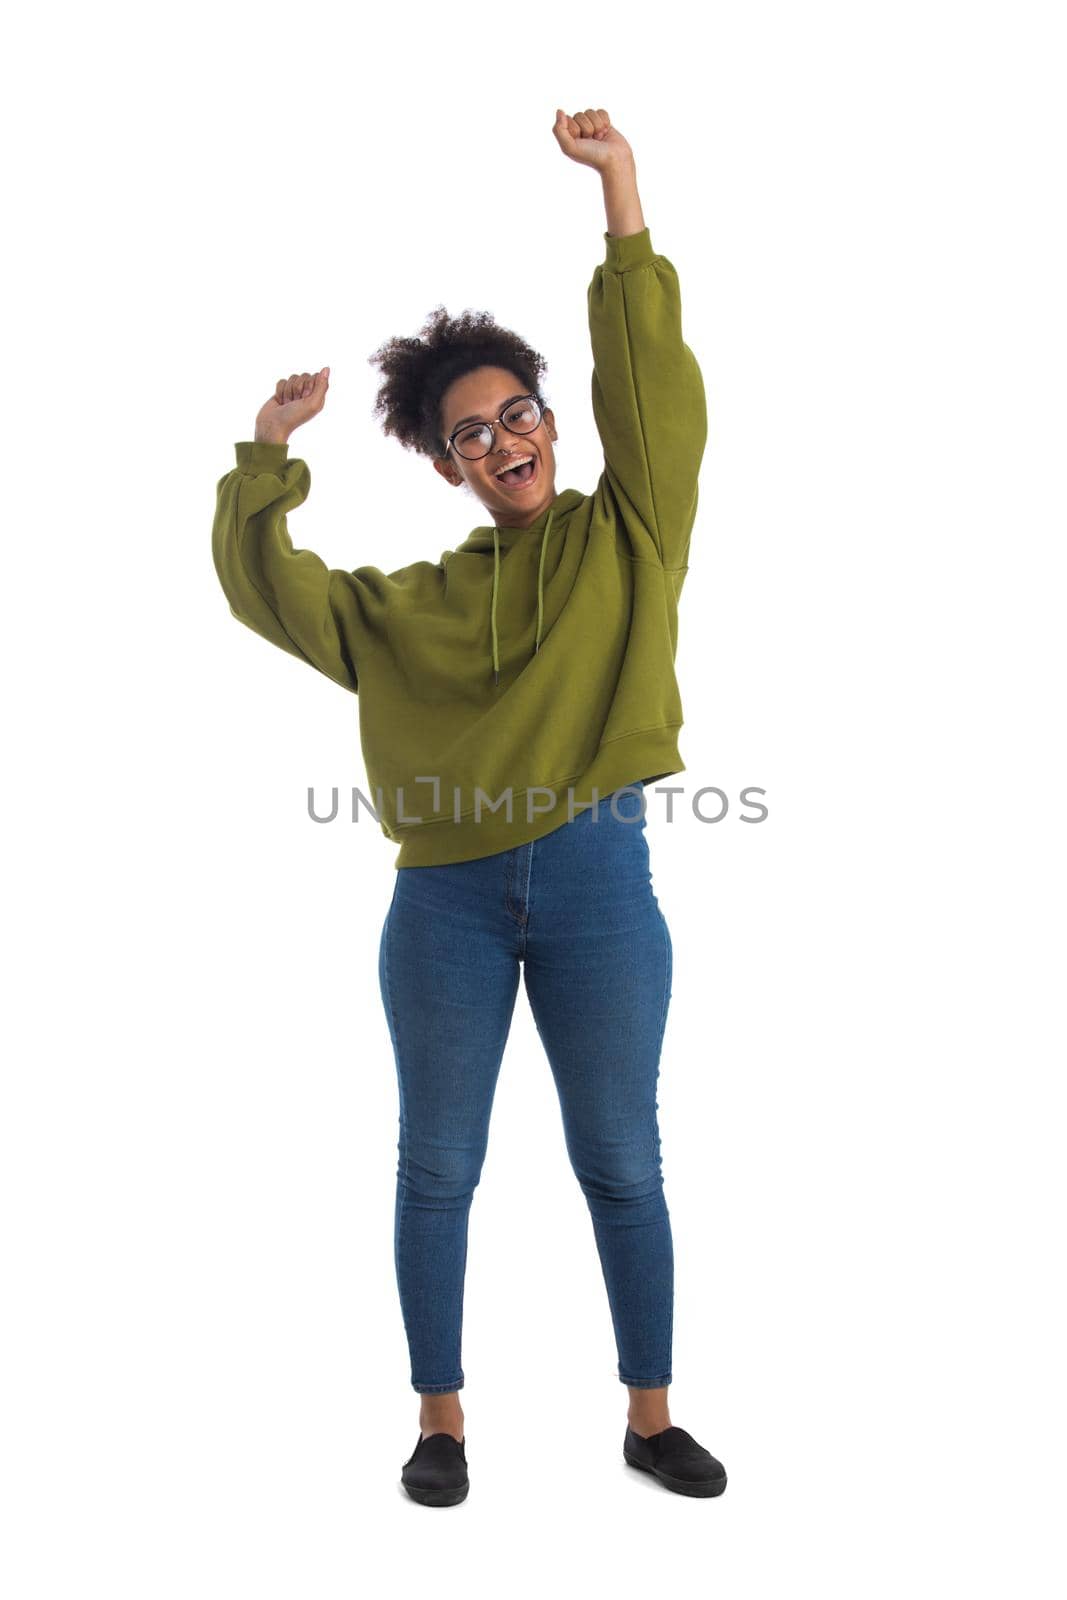 Black woman cheering with arms stretched by ALotOfPeople